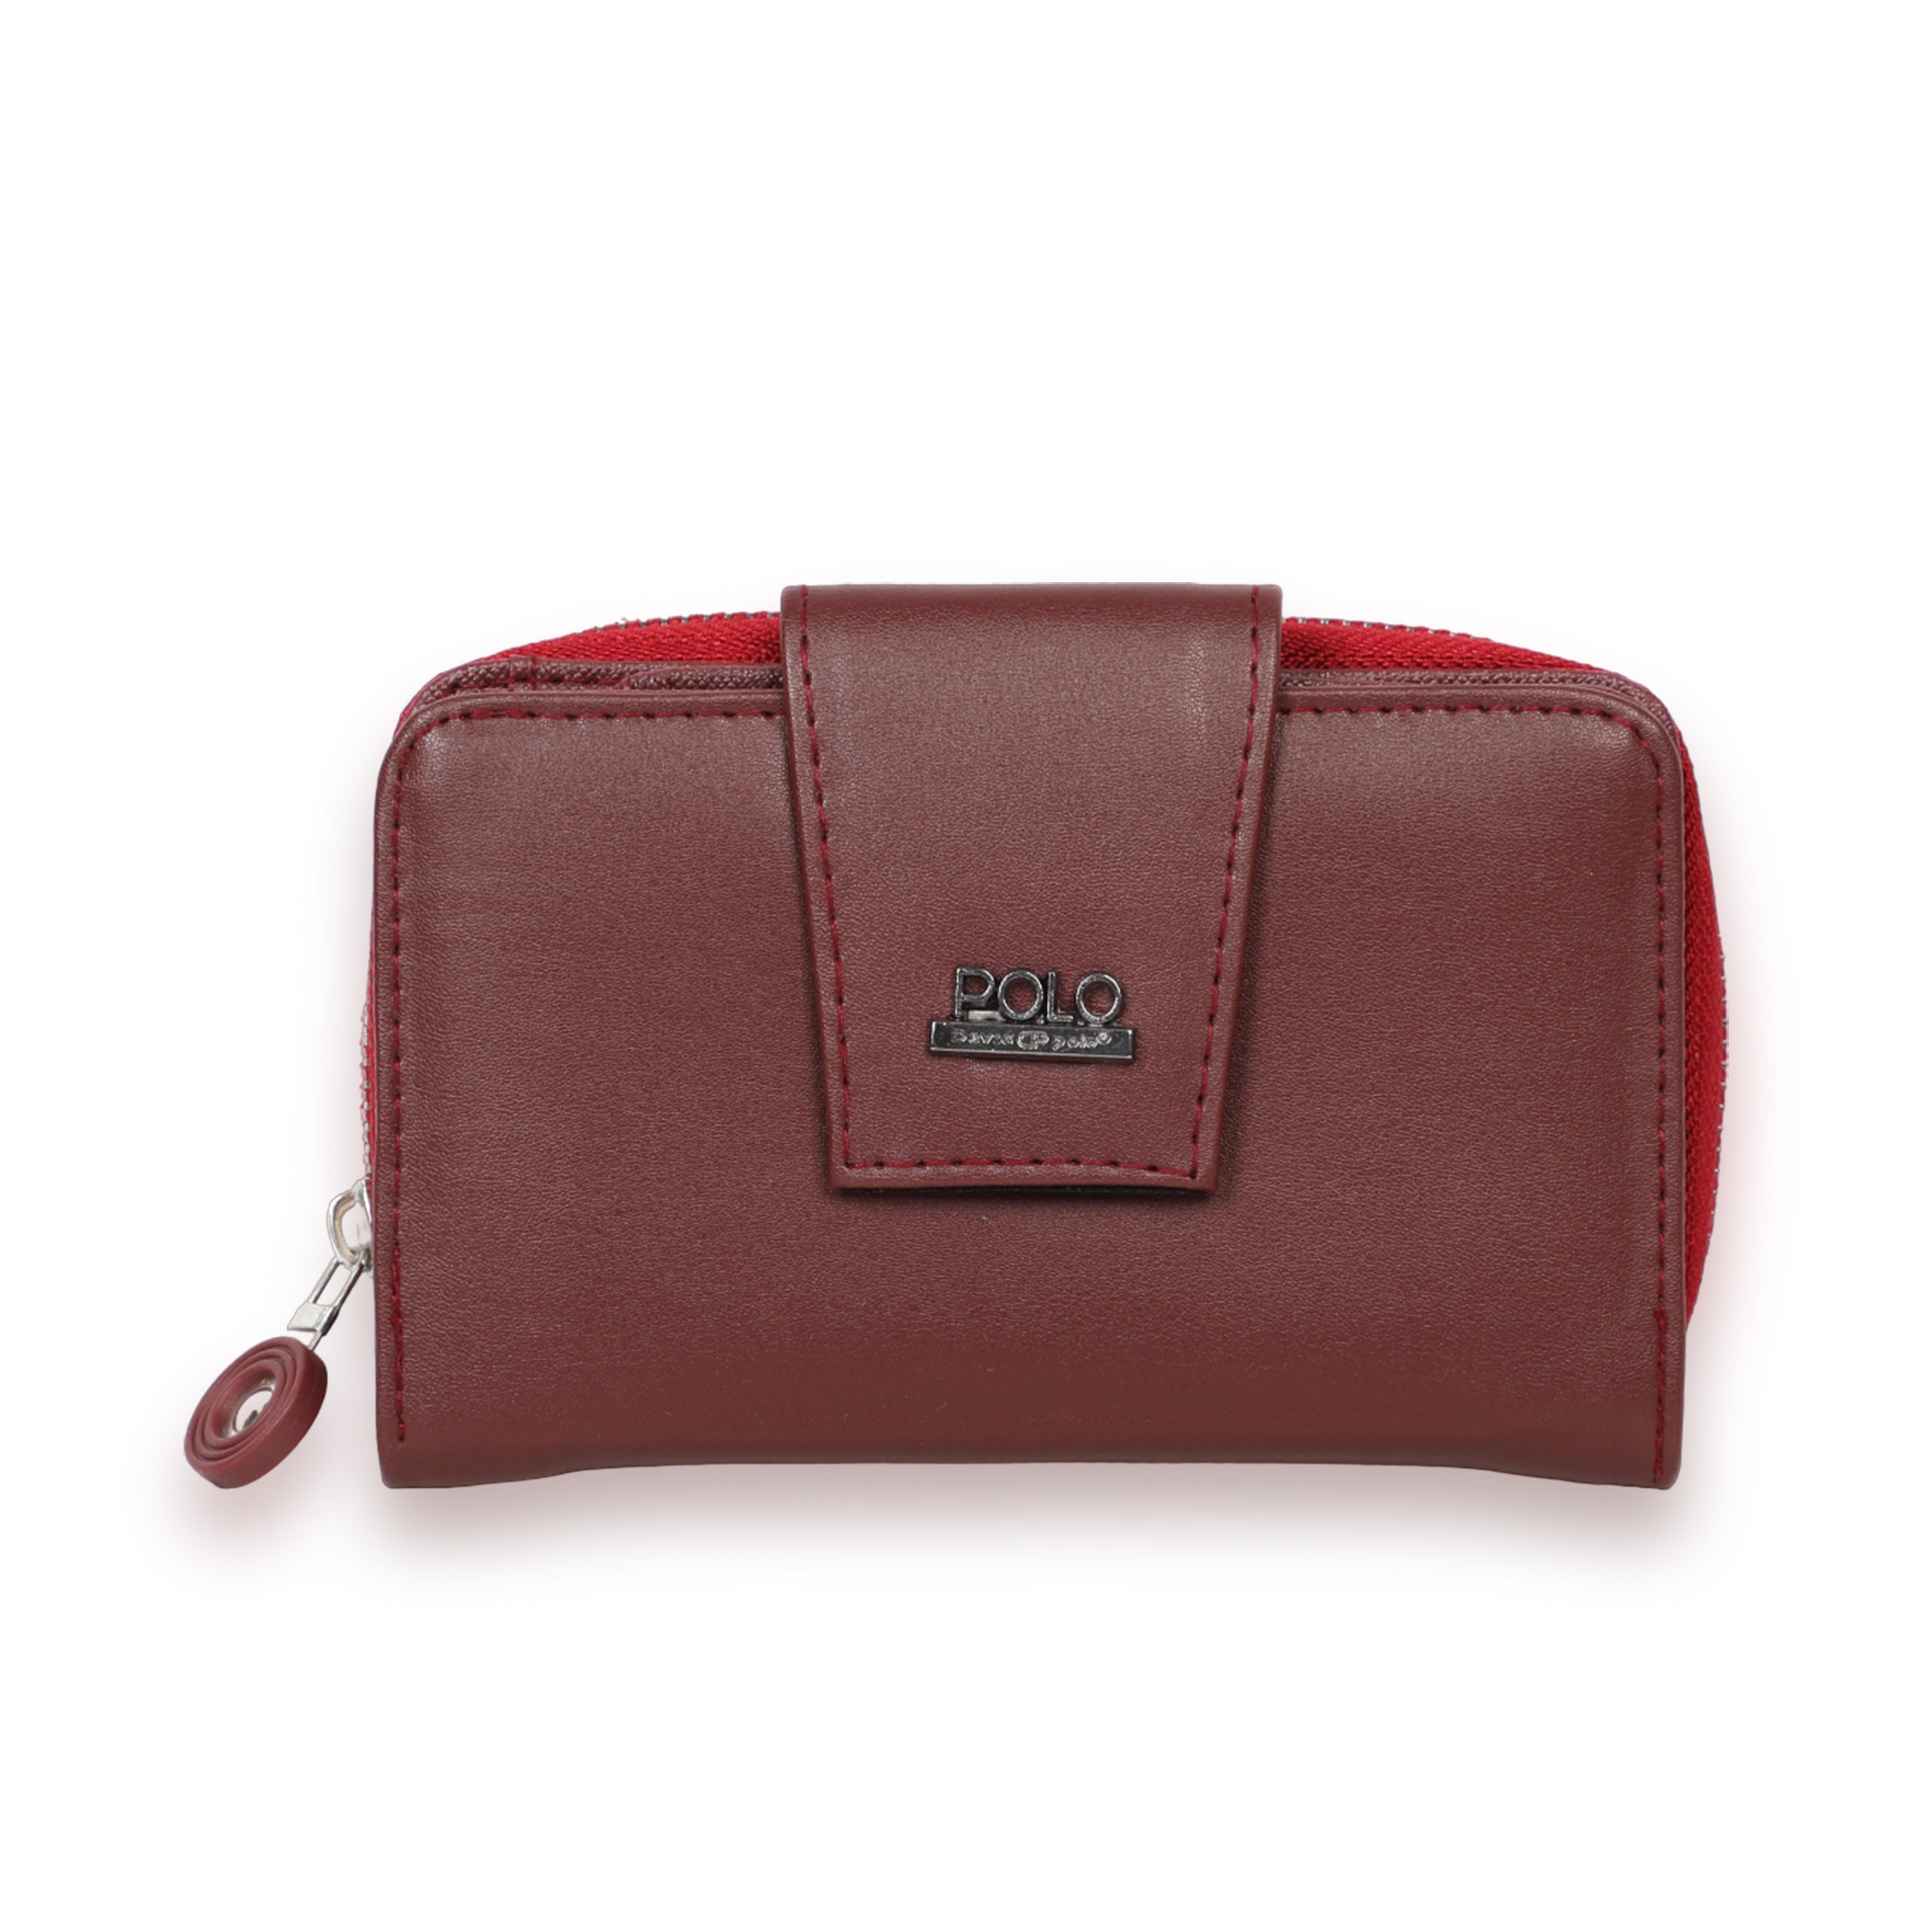 Women Bordeaux Wallet With Several Layers Design